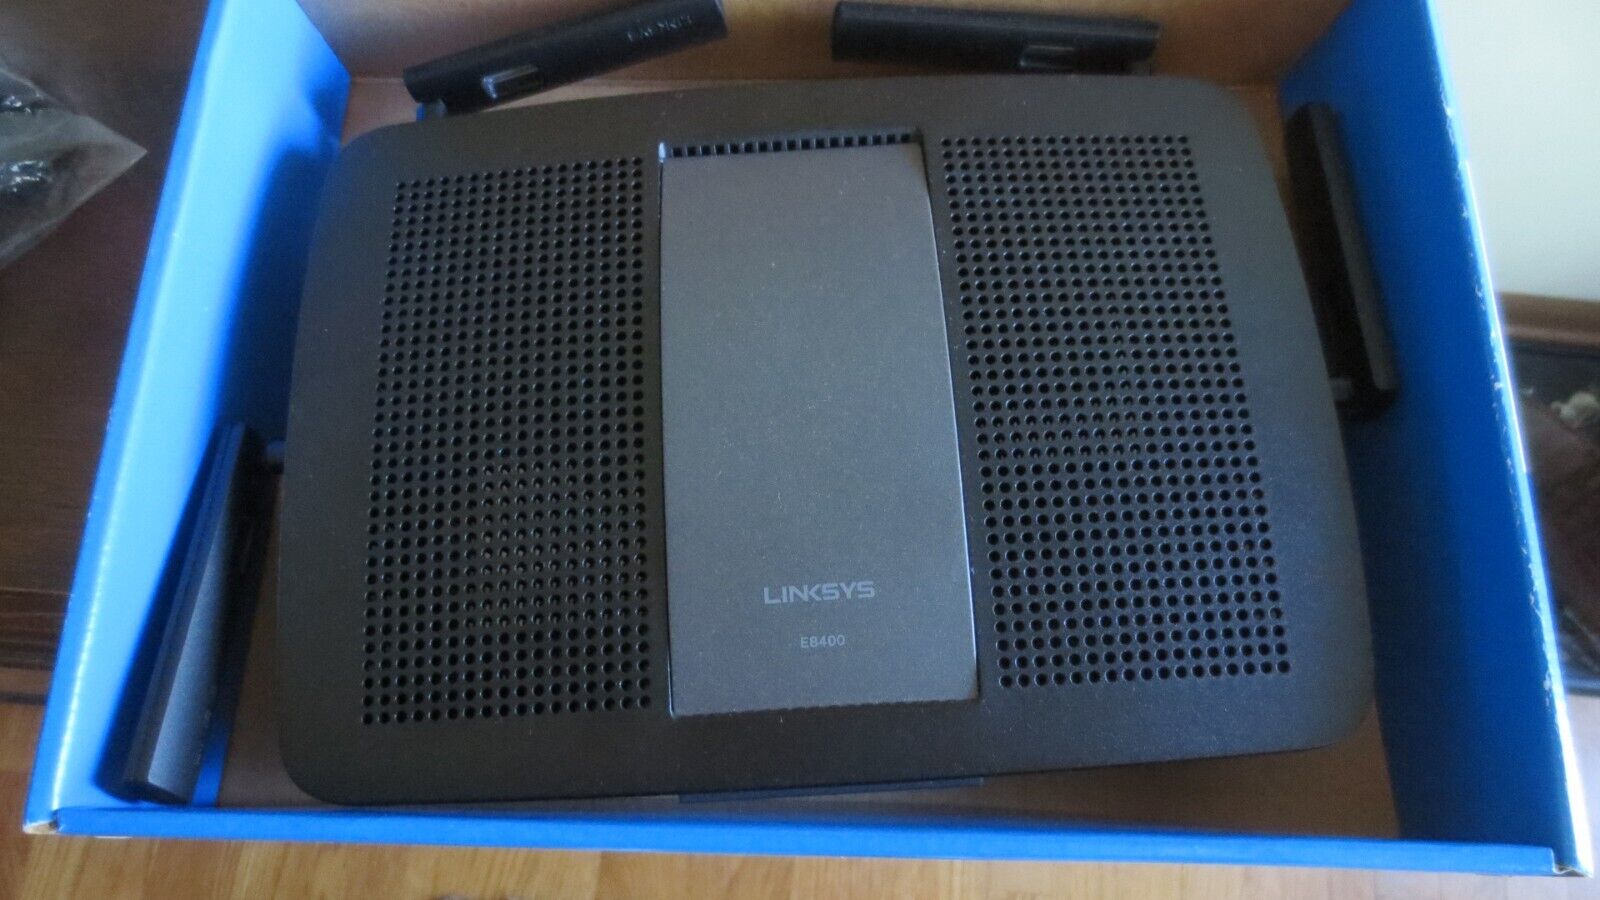 Linksys E8400 AC2400 Dual-Band WiFi Router 1733 Mbps  